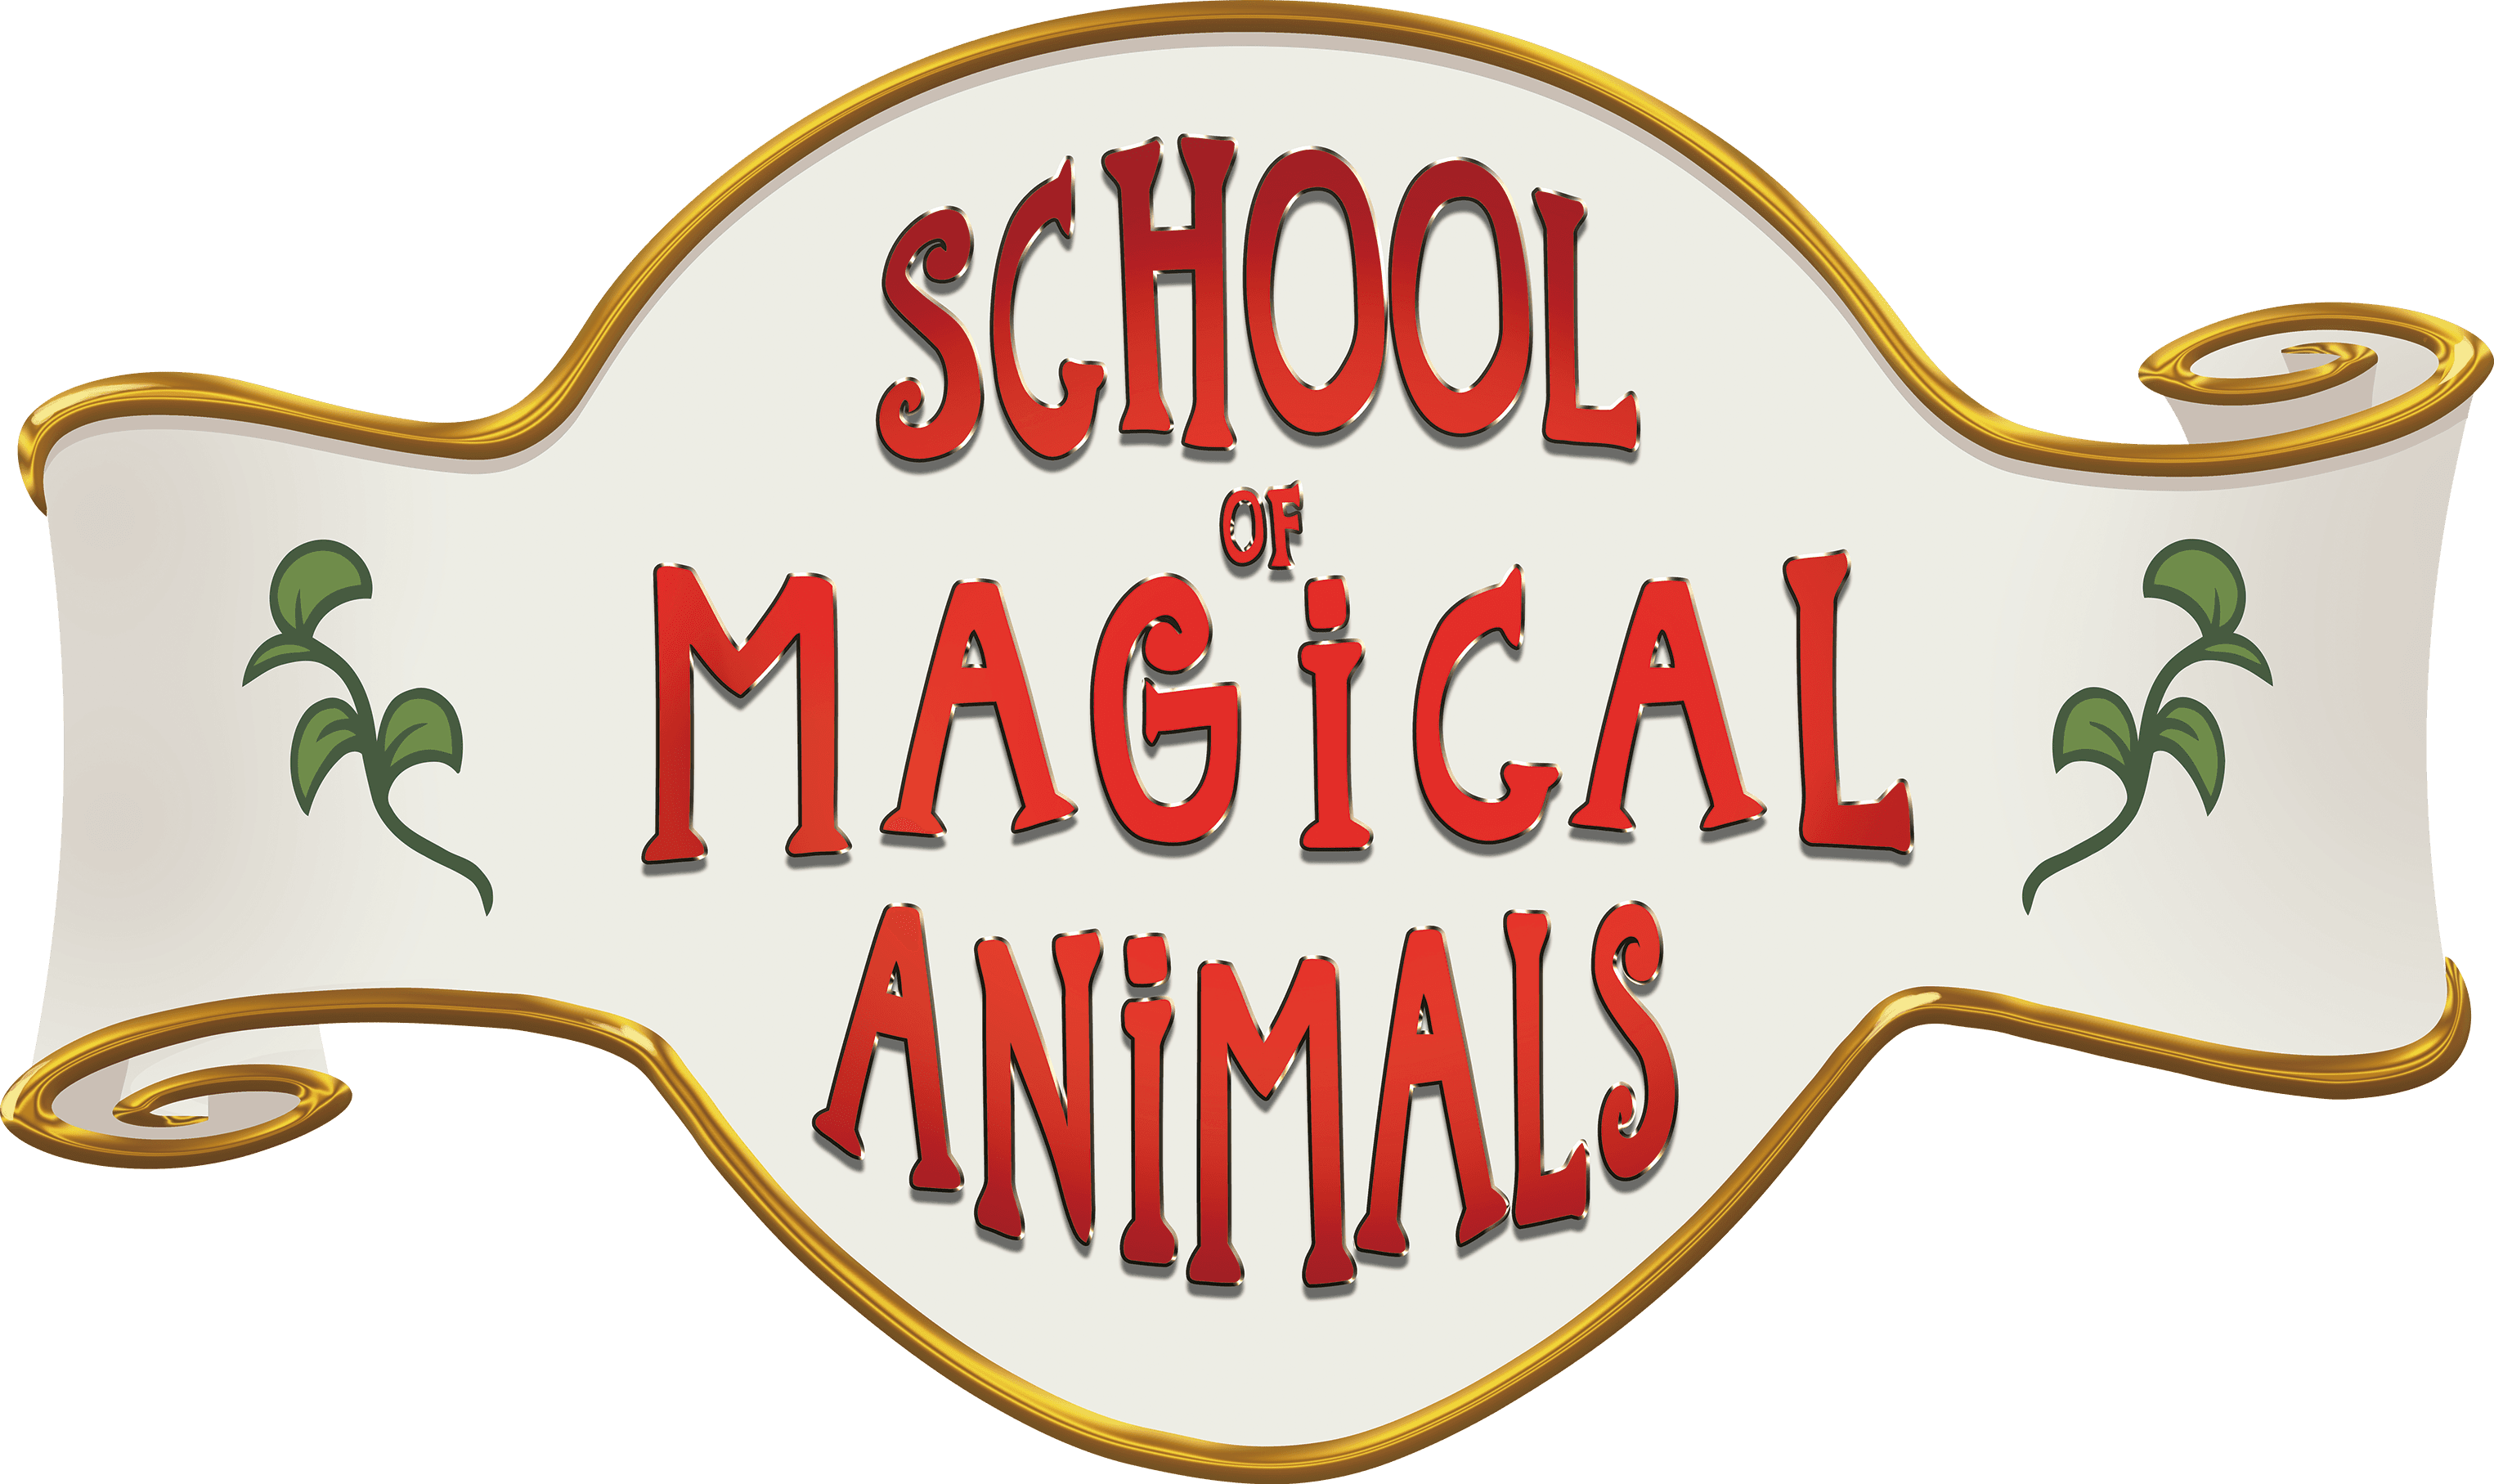 The School of the Magical Animals logo